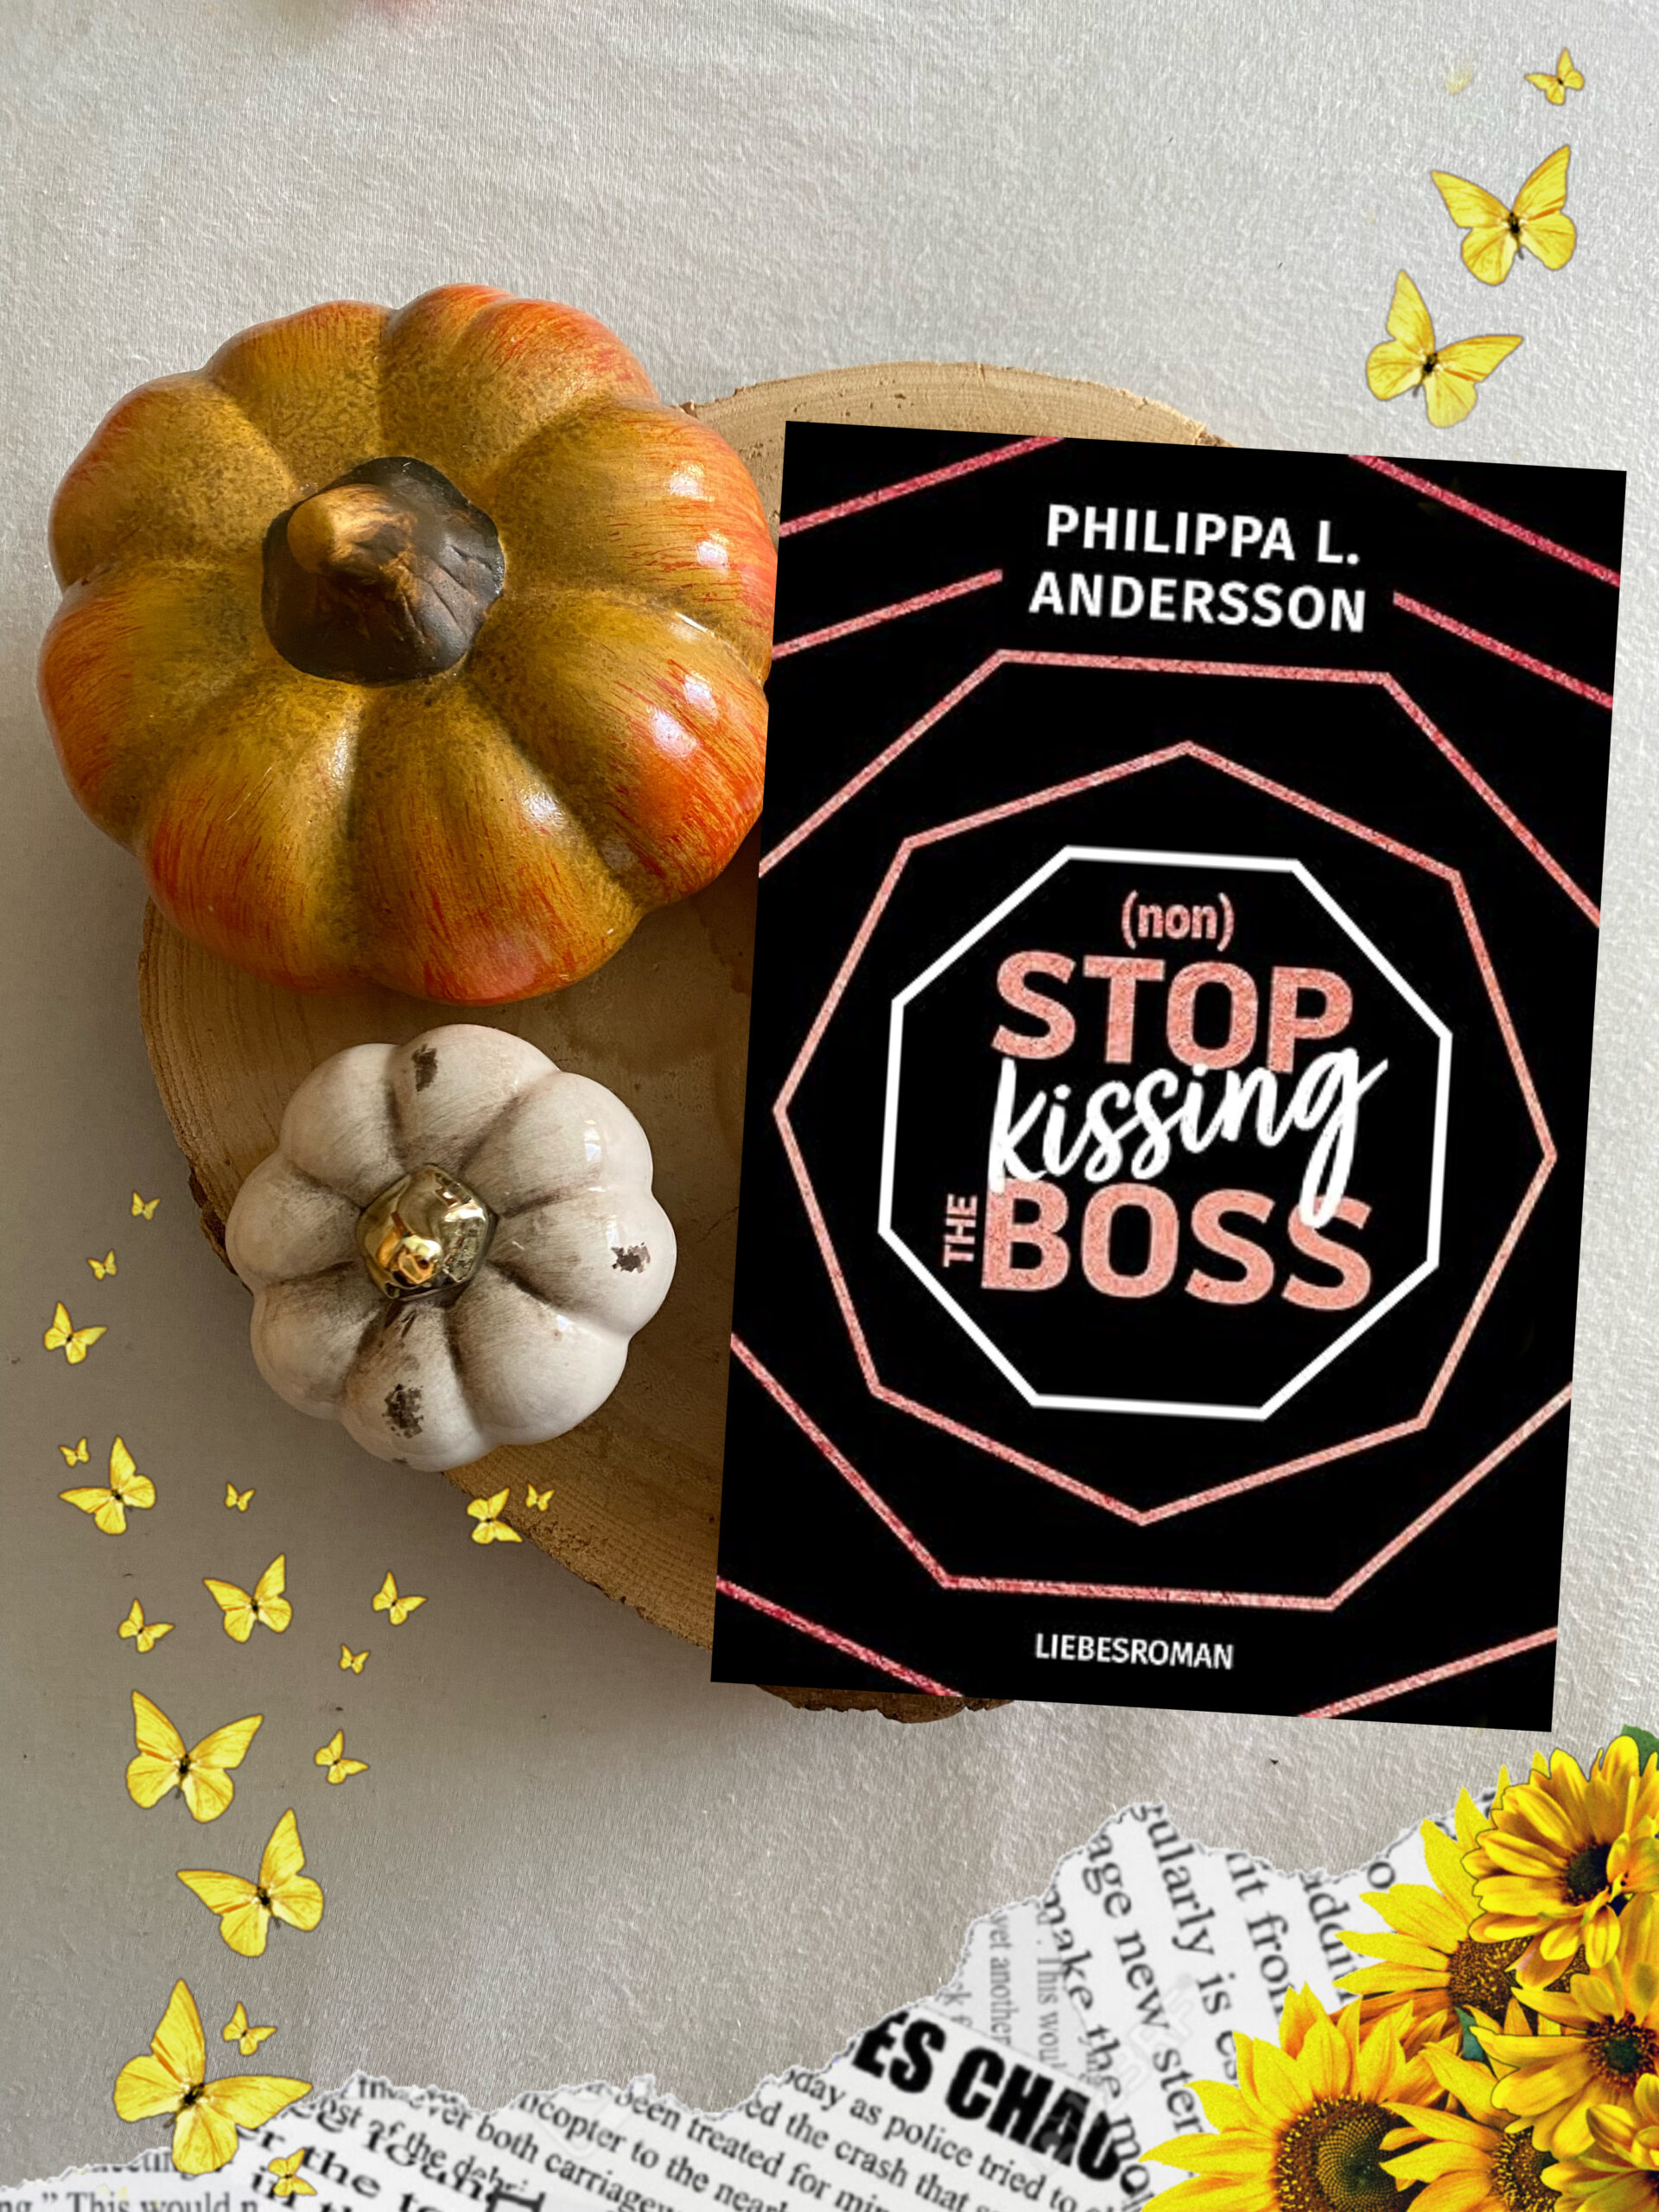 You are currently viewing Nonstop kissing the boss von Philippa L. Andersson